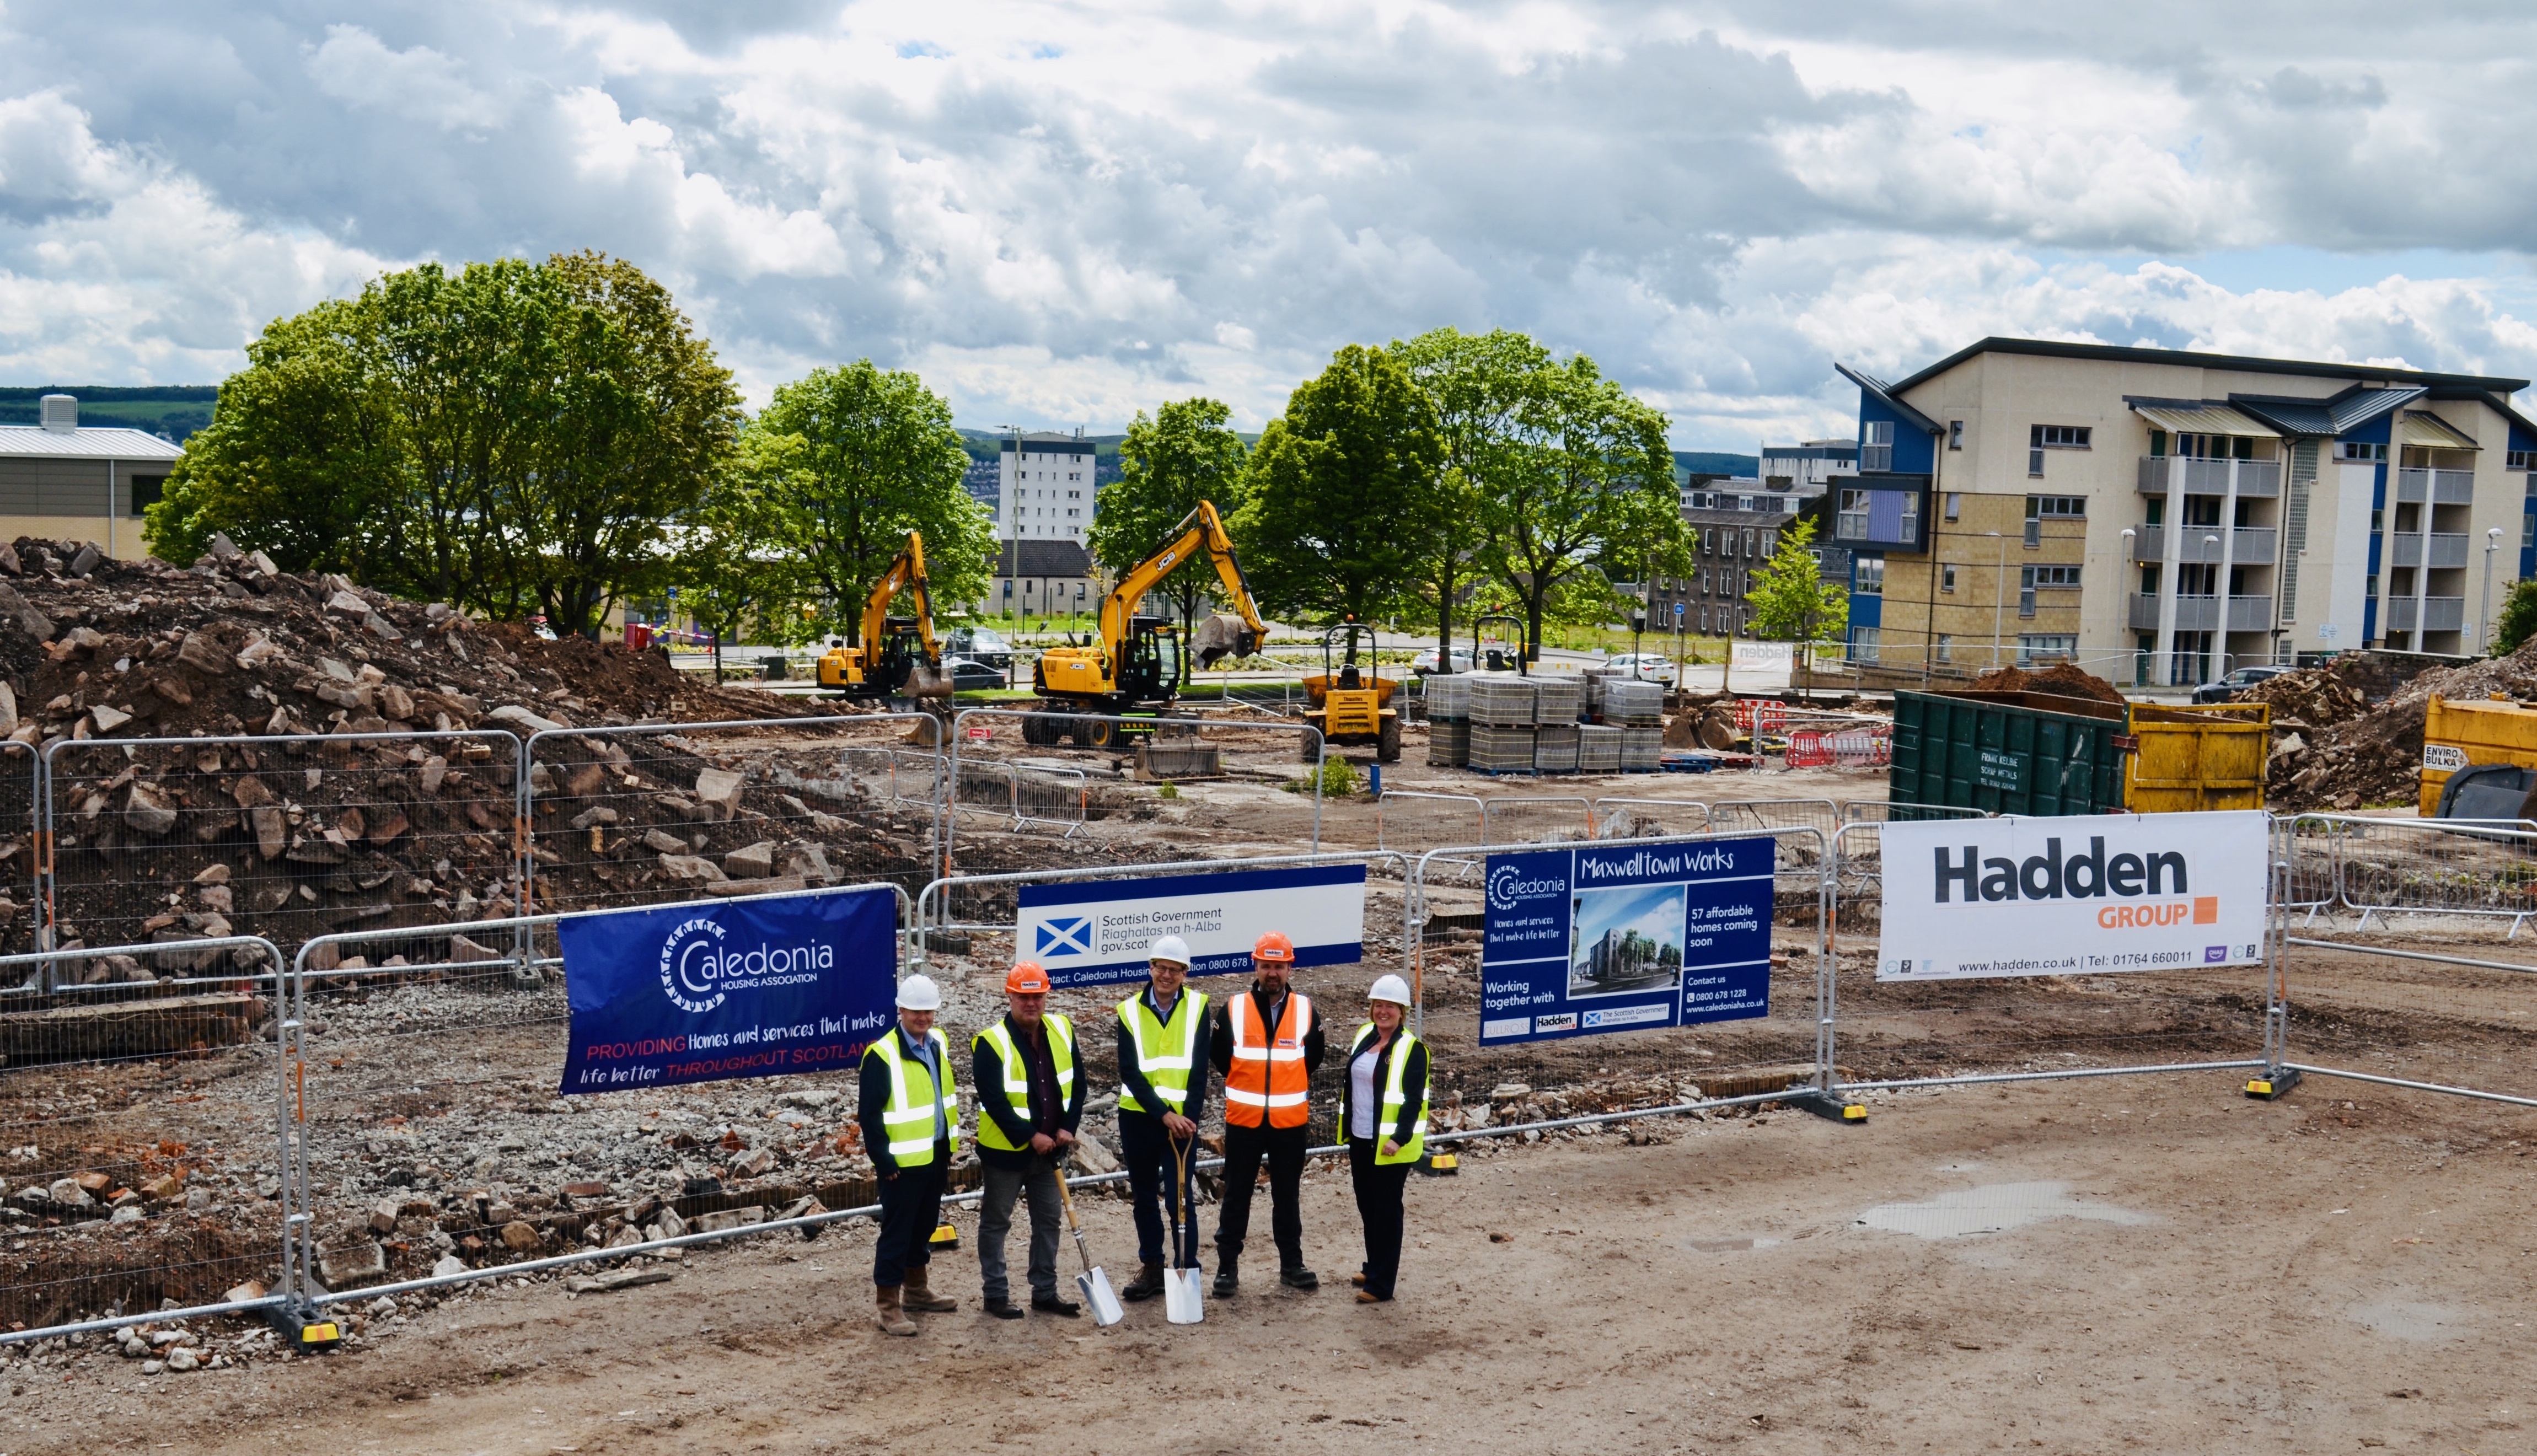 Caledonia starts work on new homes for Dundee